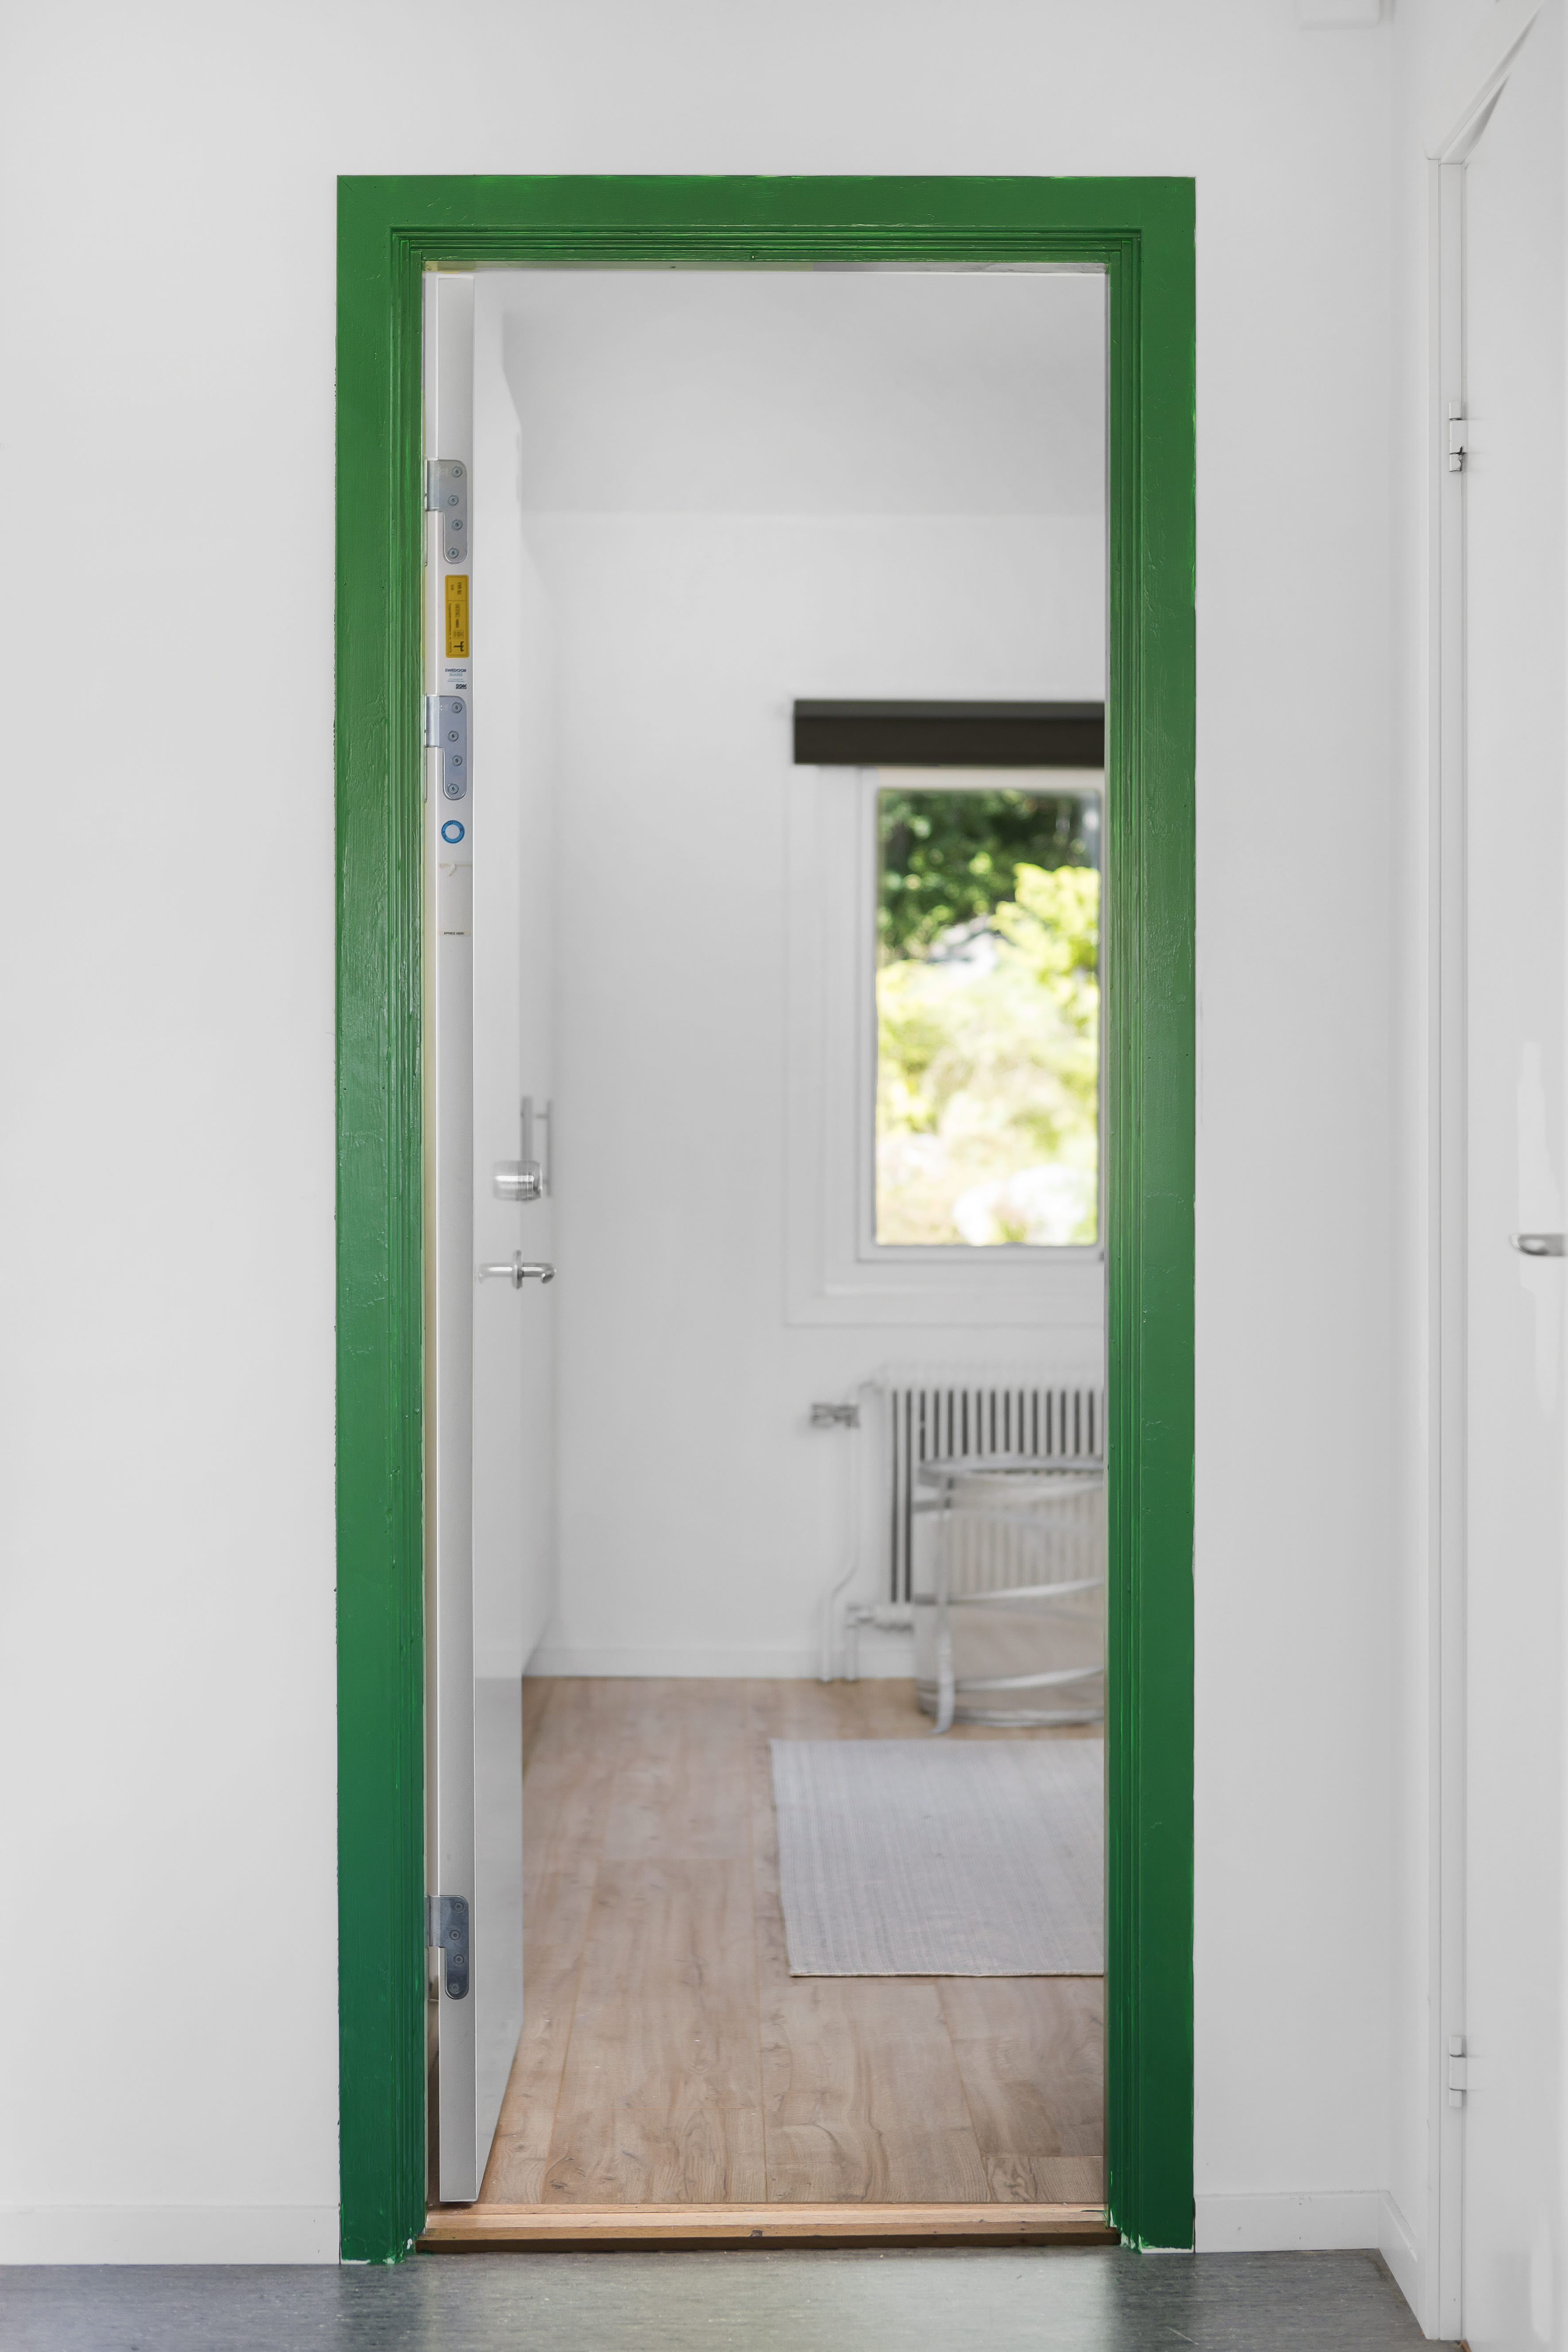 A room with a green door